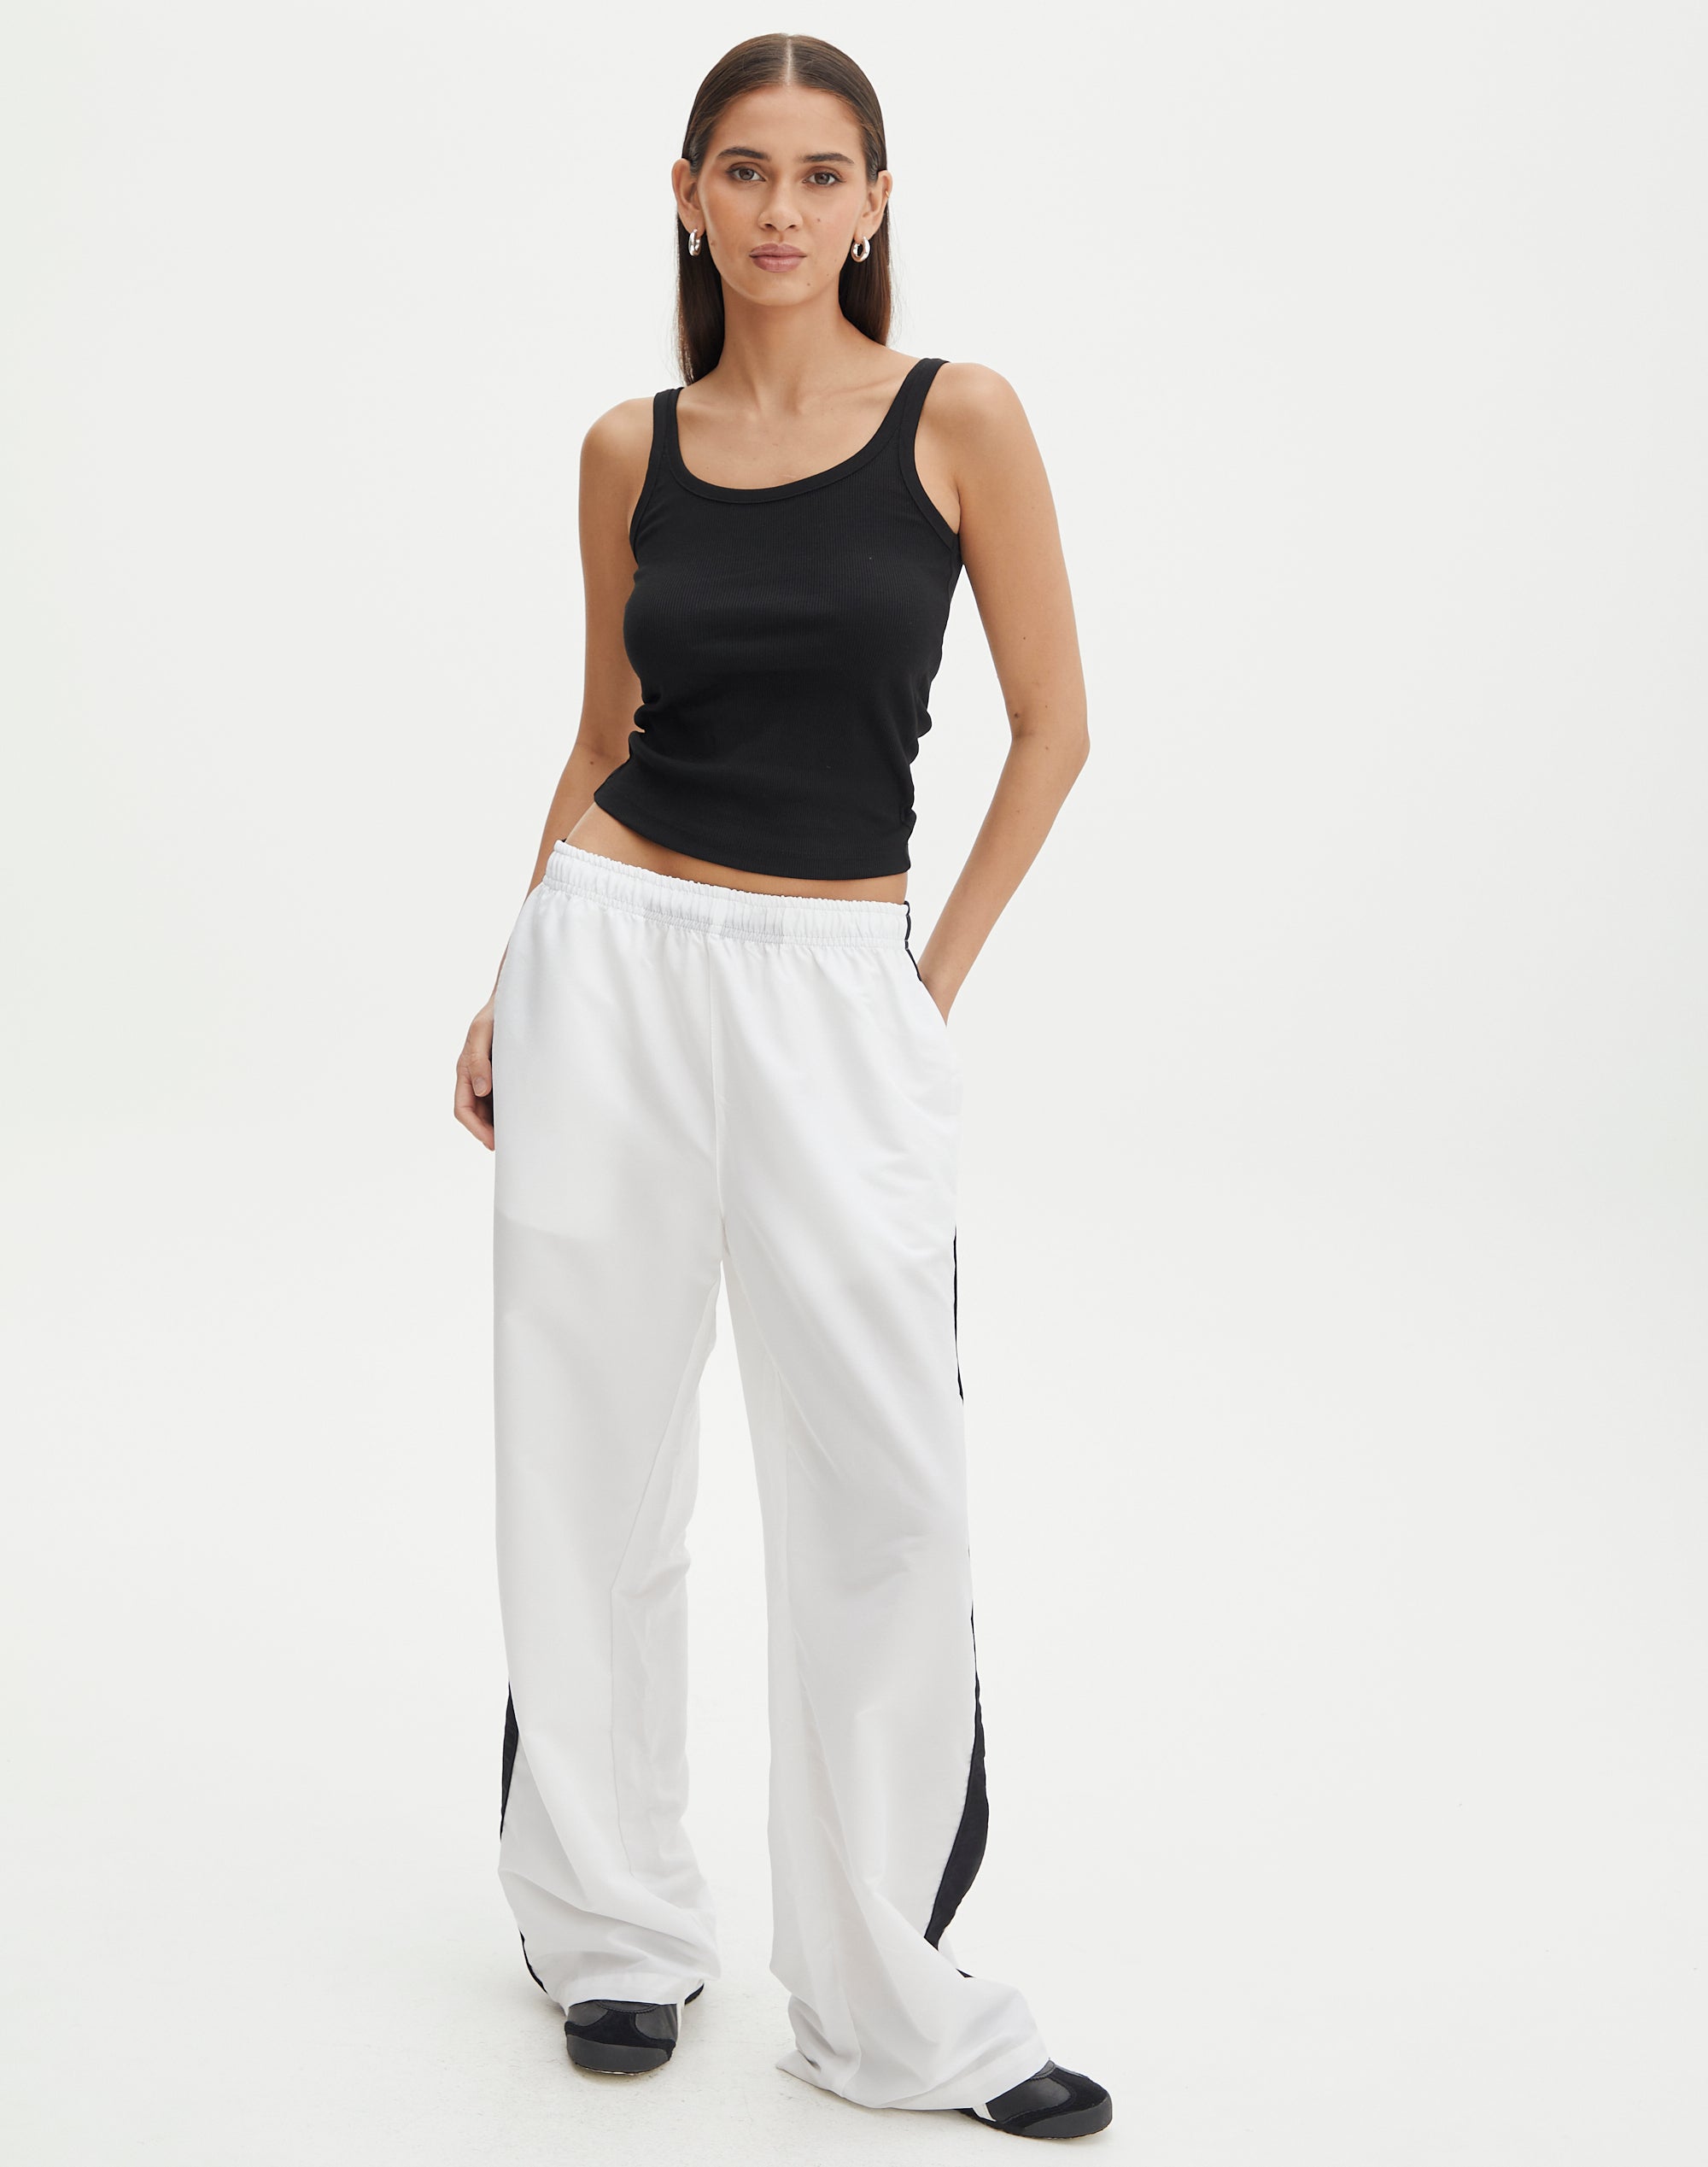 ASOS DESIGN wide leg trouser in stripe with waistband detail in grey